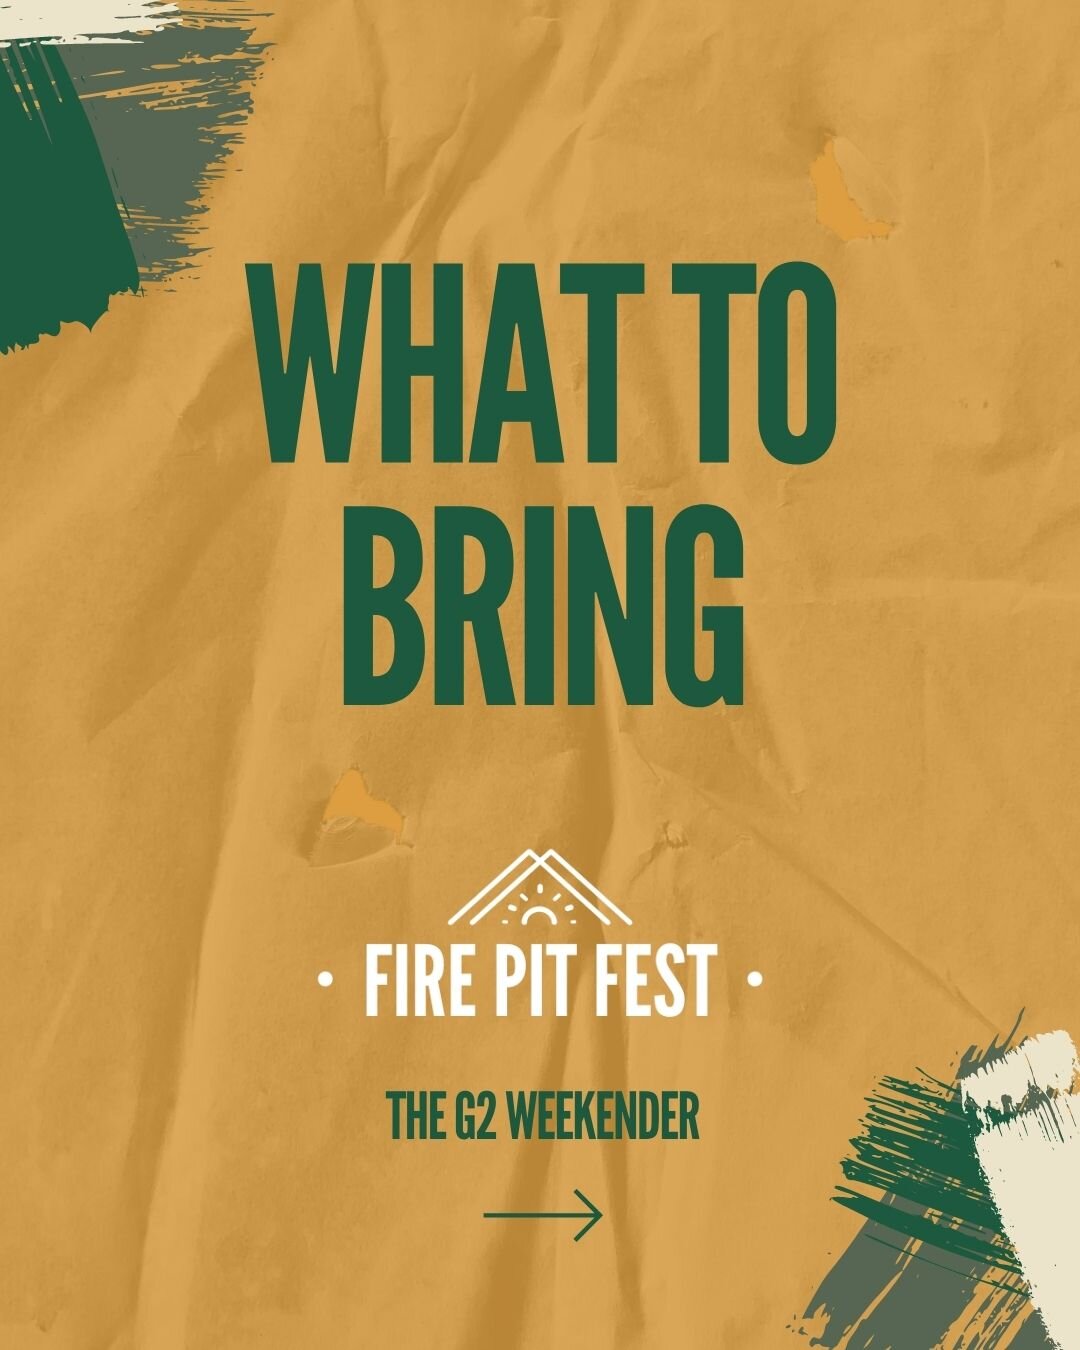 Firepit Fest is this weekend!! 🔥Here's a brief list of the things we think you should bring with you.